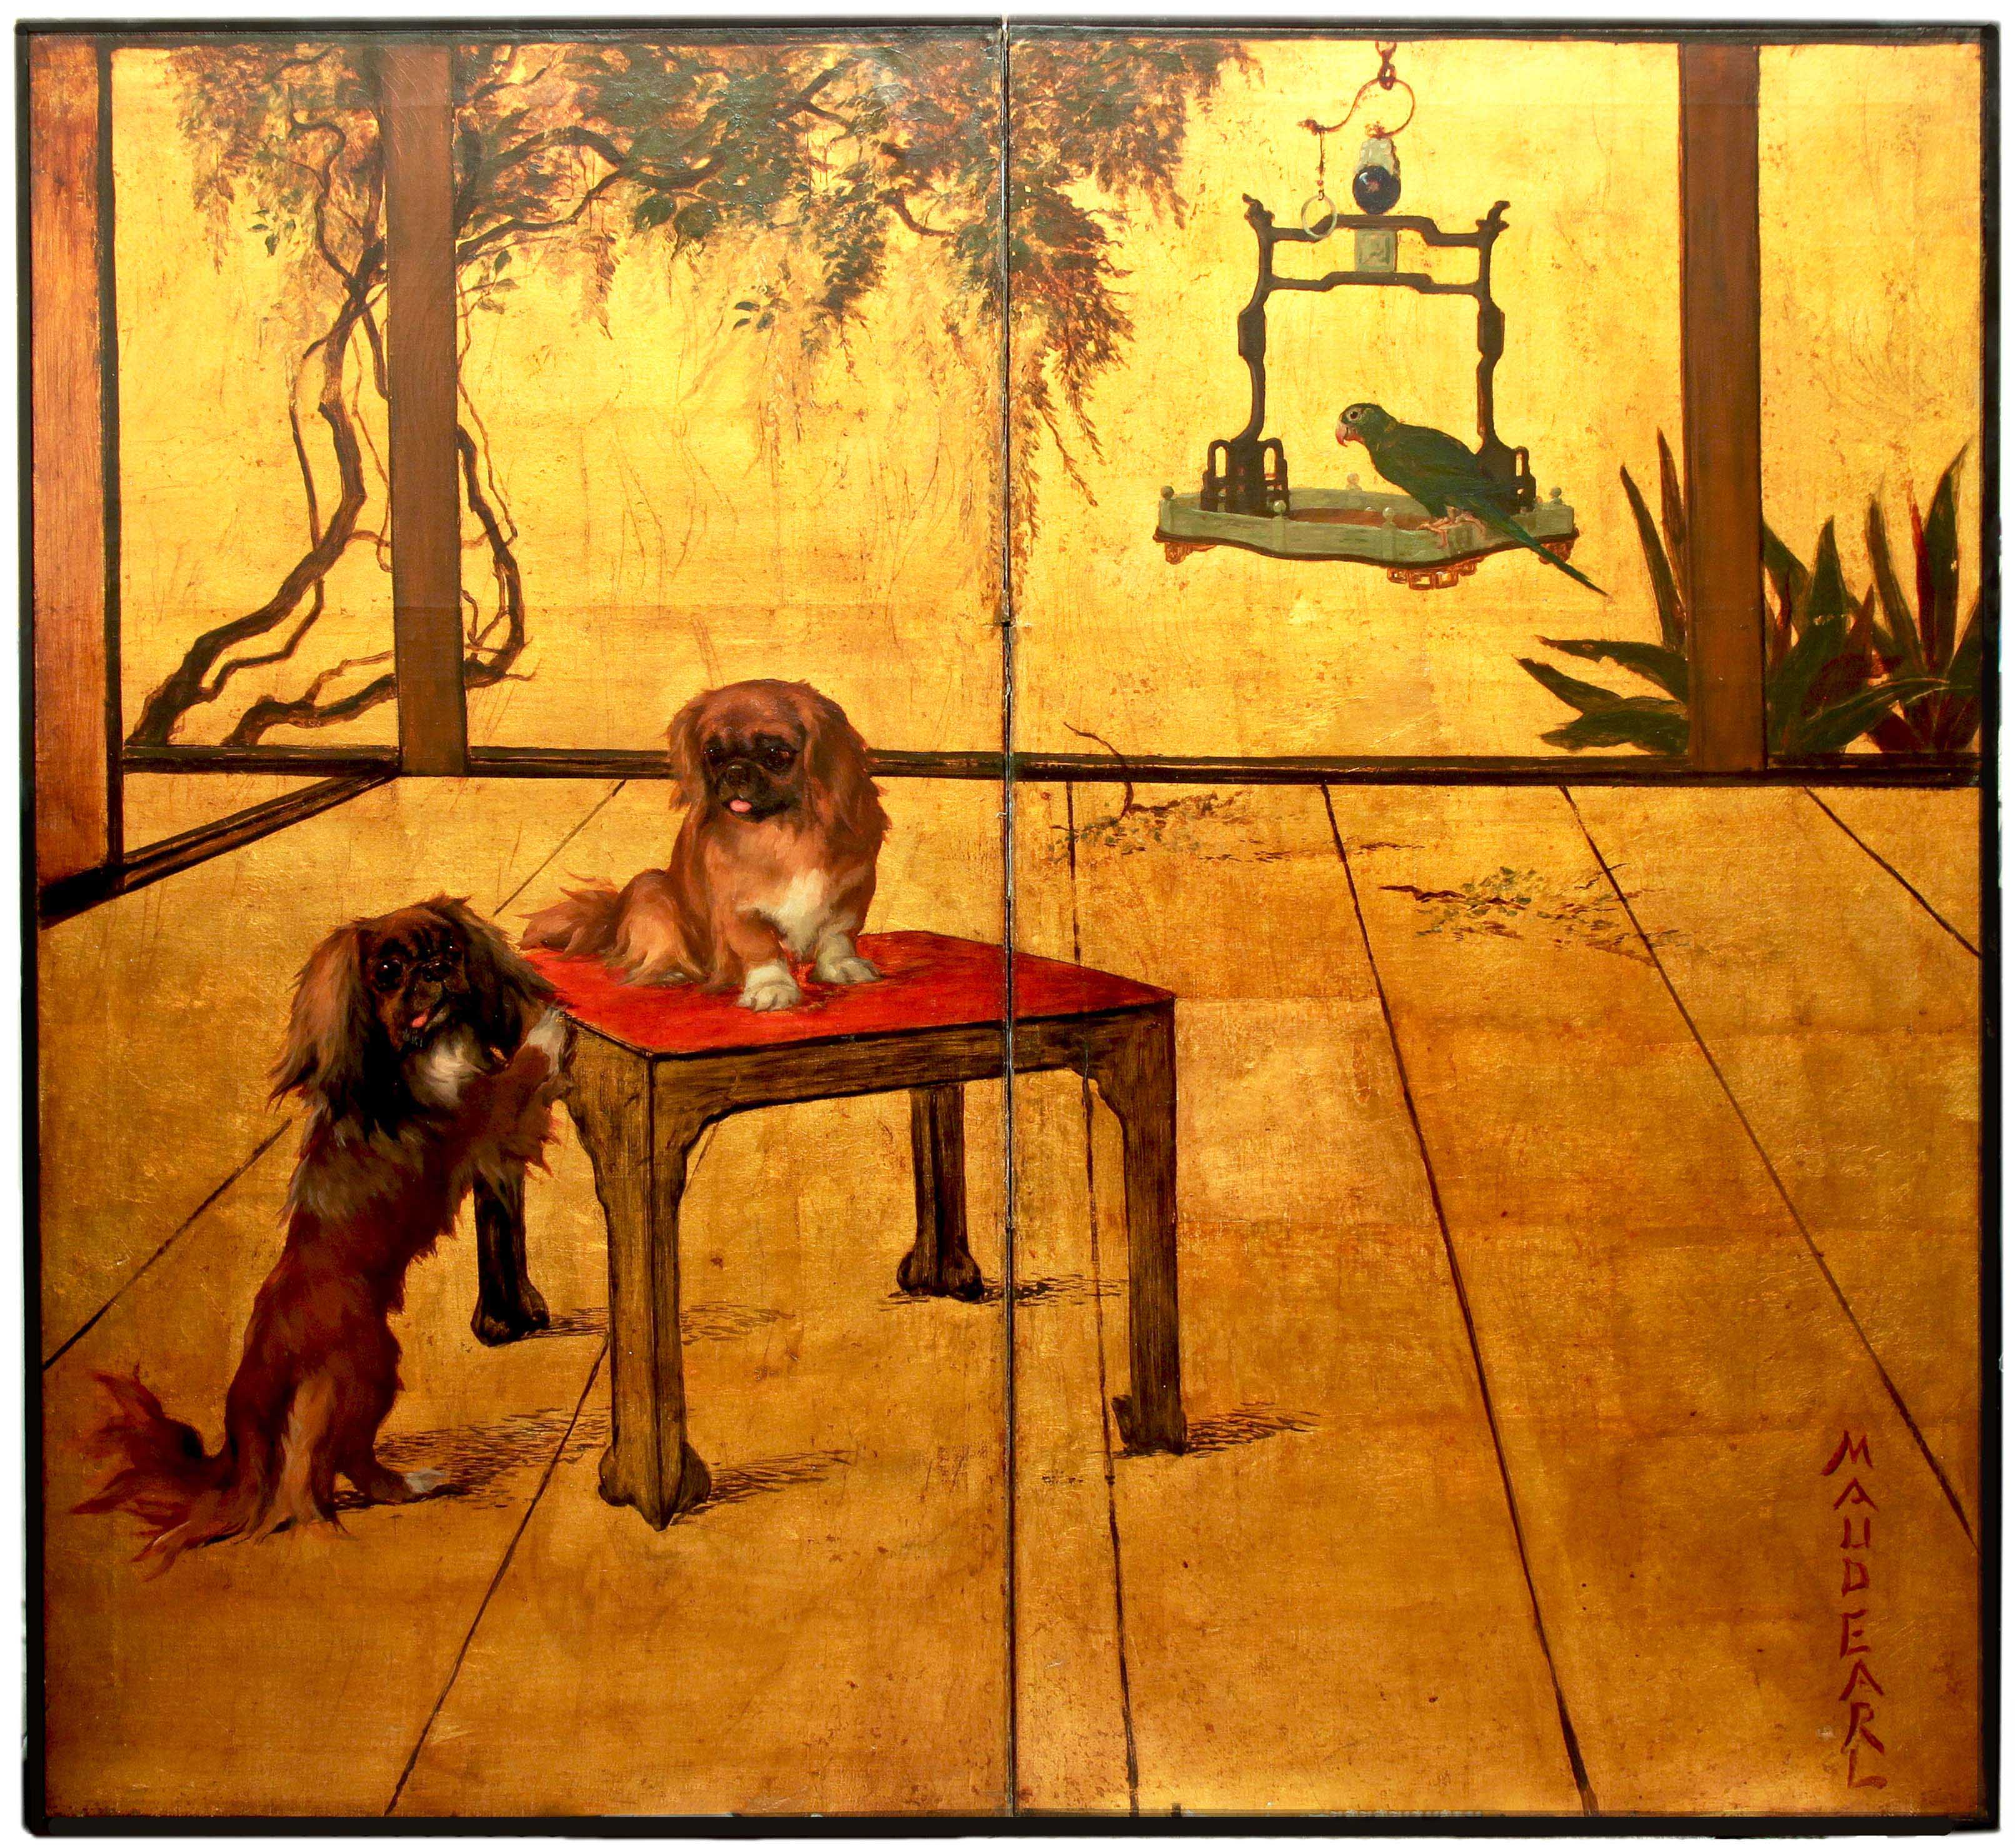 Click for larger image: Pekingese Screen by Maud Earl (1864-1943) - Pekingese Screen by Maud Earl (1864-1943)